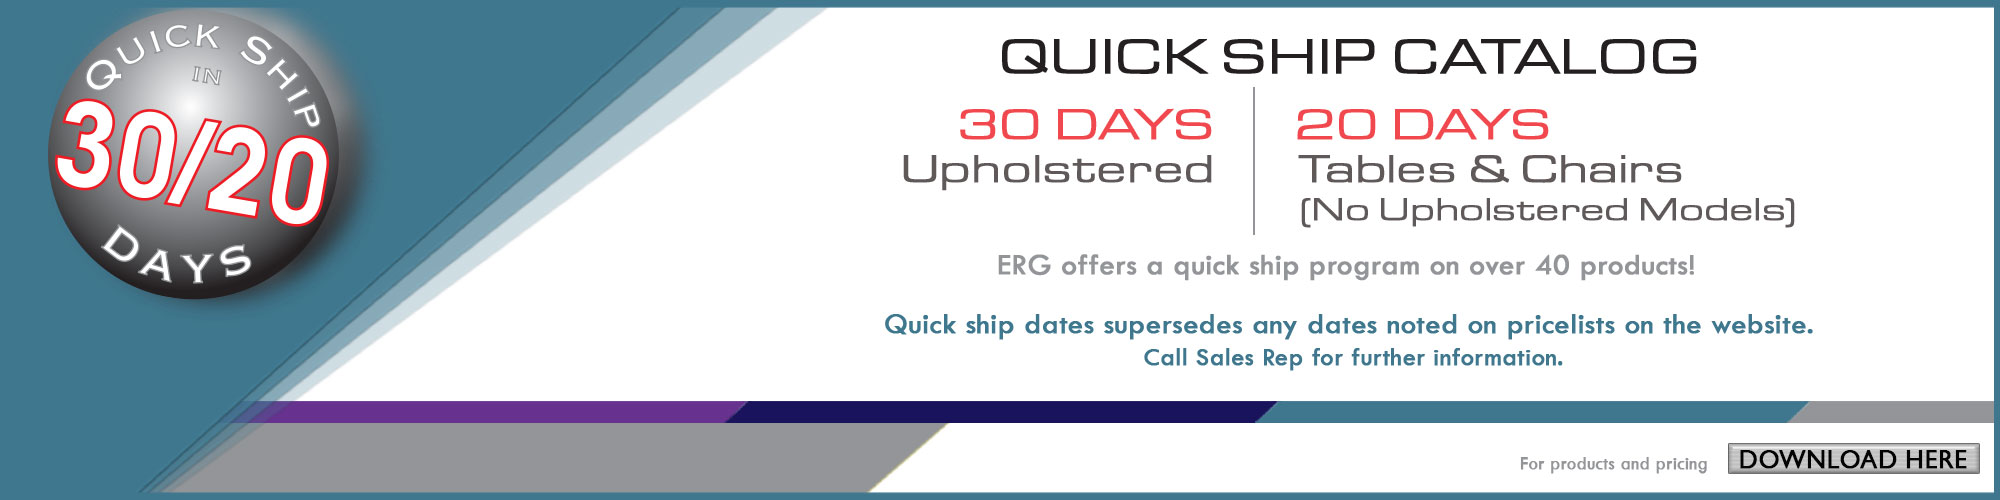 15 Day Quick Ship Download